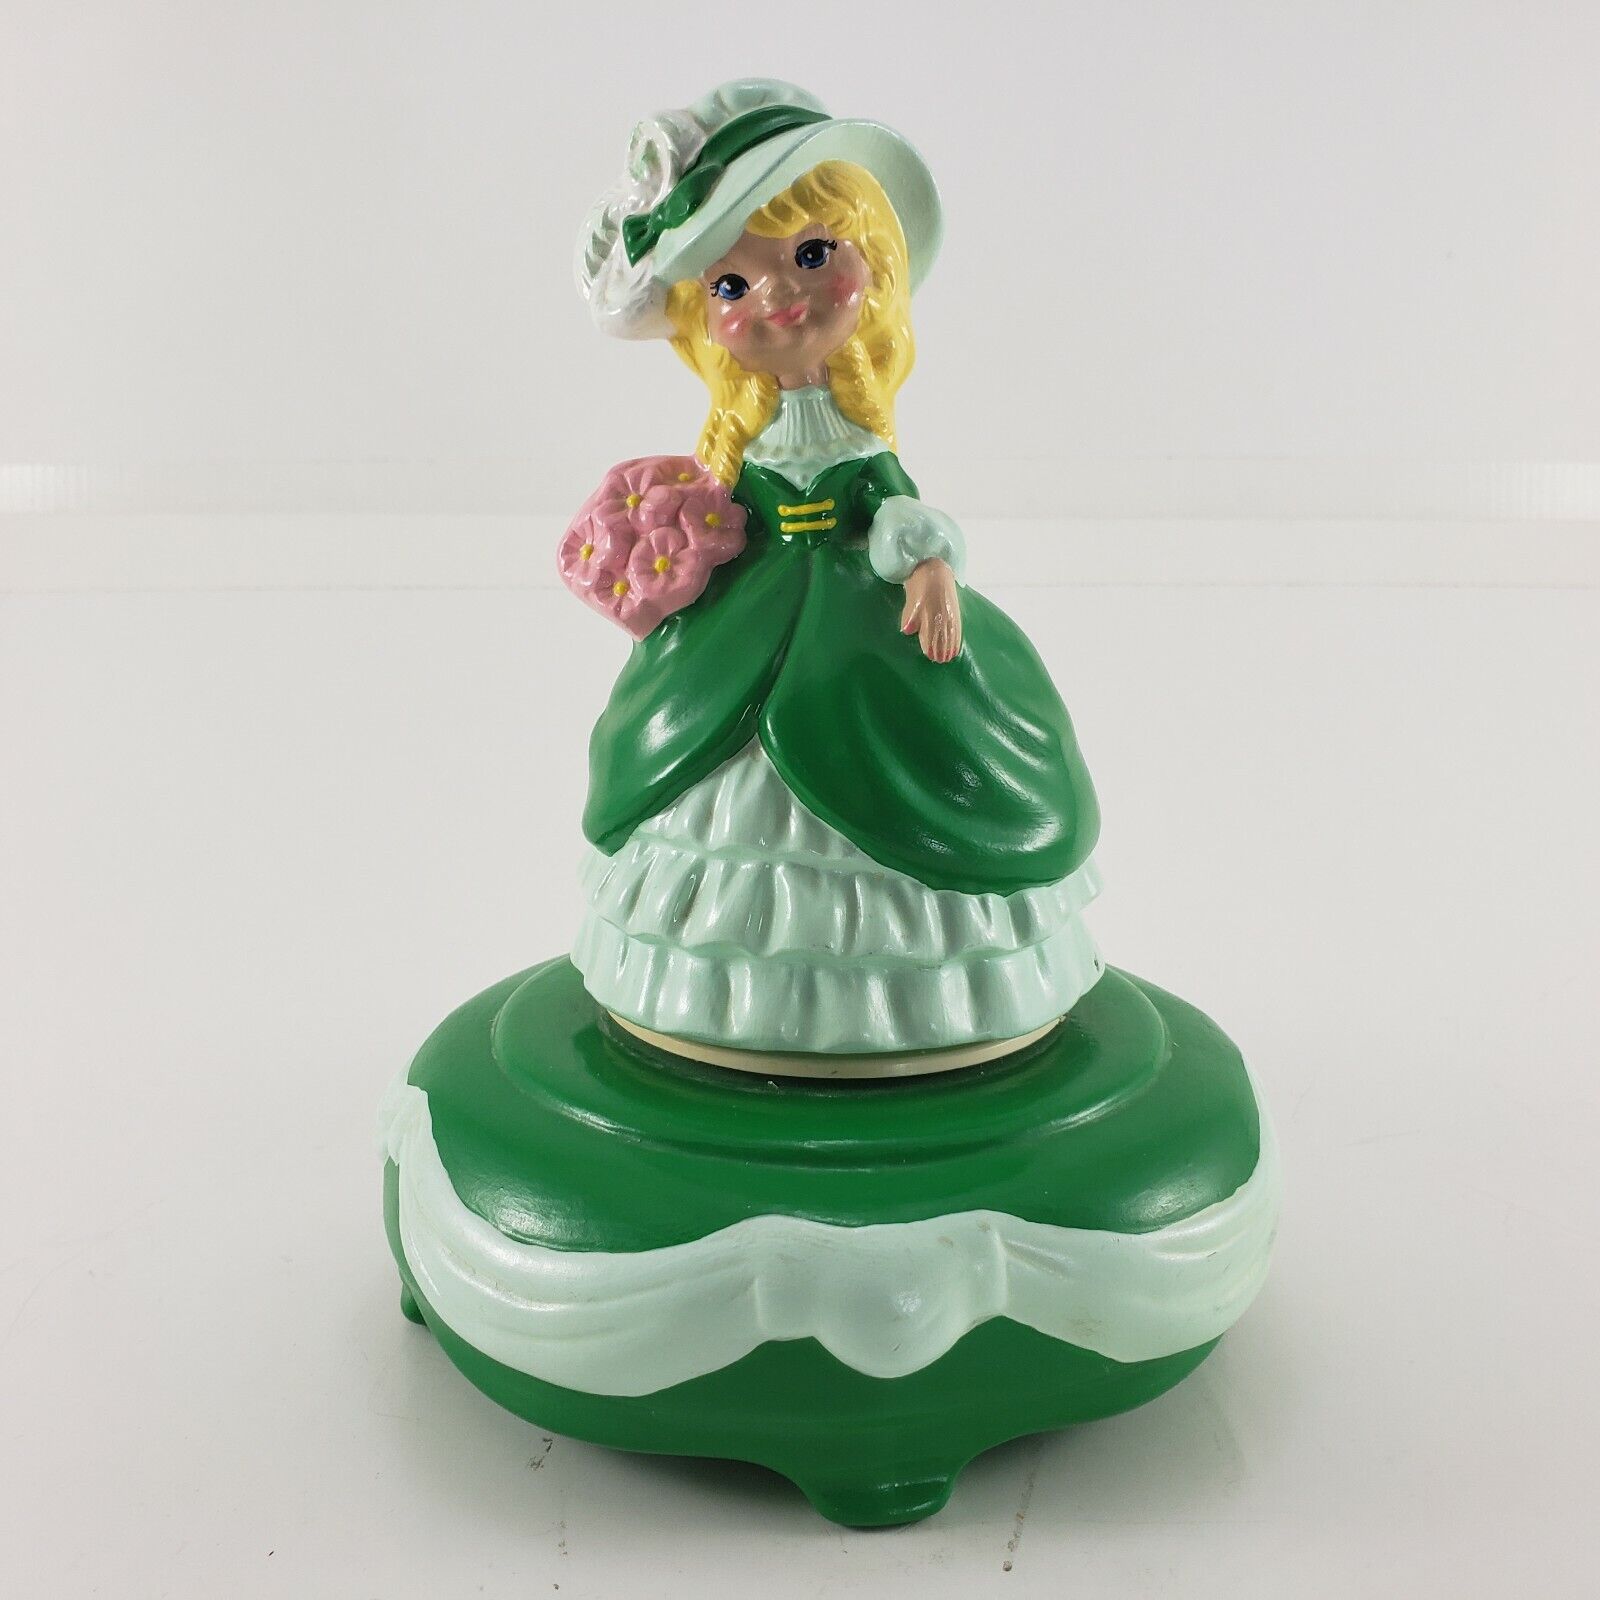 Ceramic Rotating Music Box Young Girl in Greens Plays It's A Small World Vintage